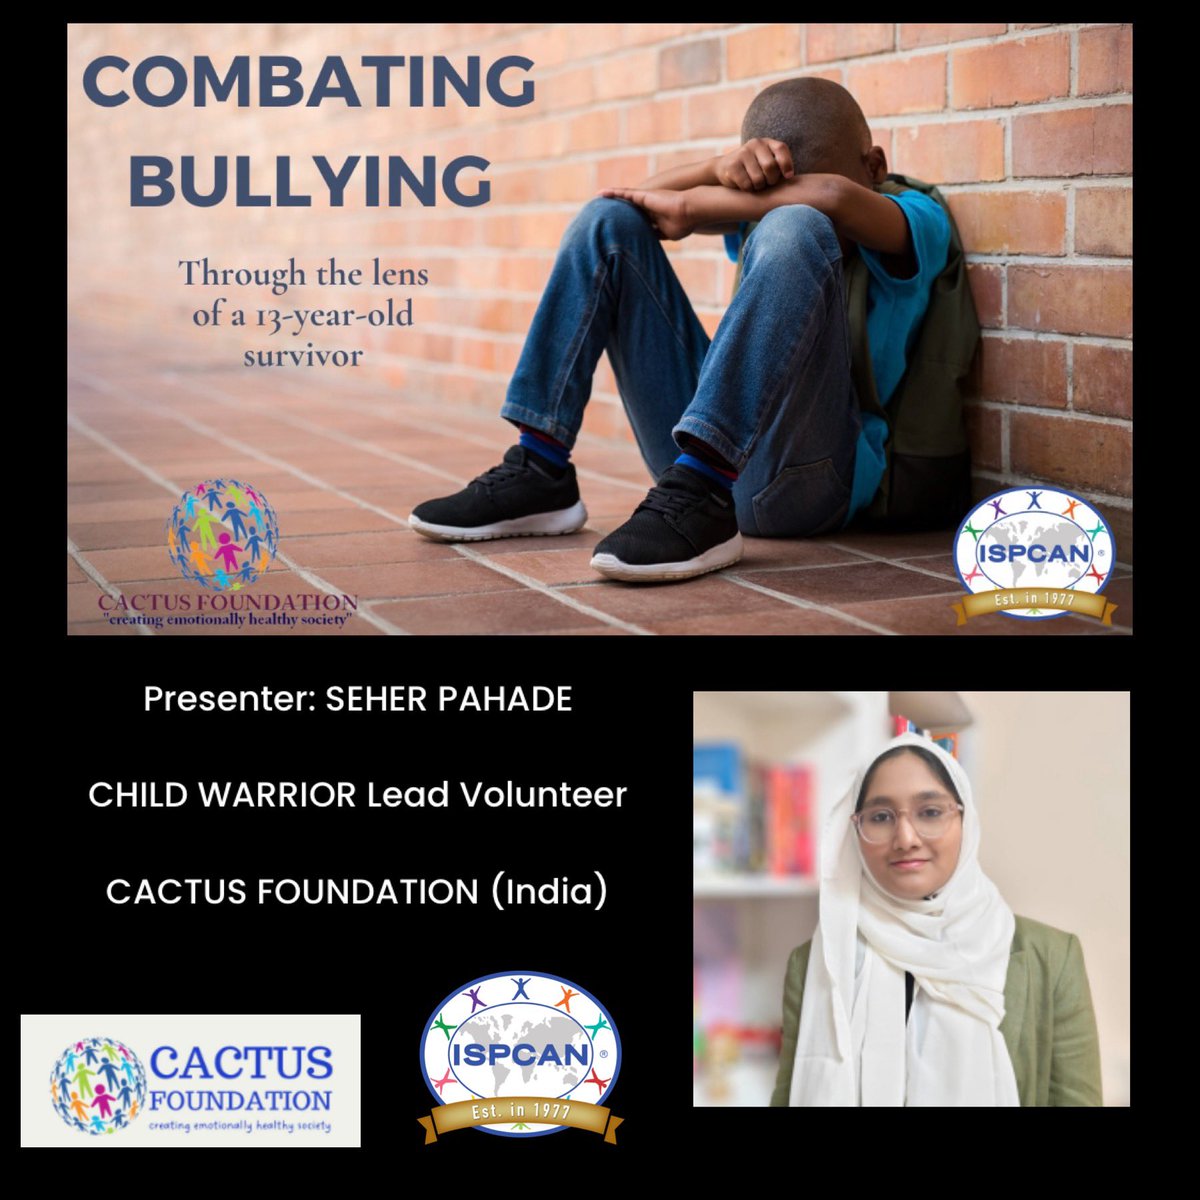 ISPCAN Webinar - This Wednesday - April 17, 10:00am - 11:30am EDT. Please join us as we engage the voice of youth by understanding methods, strategies, and interventions to prevent all forms of bullying authored and presented by a young survivor. Learn ways to create a safe